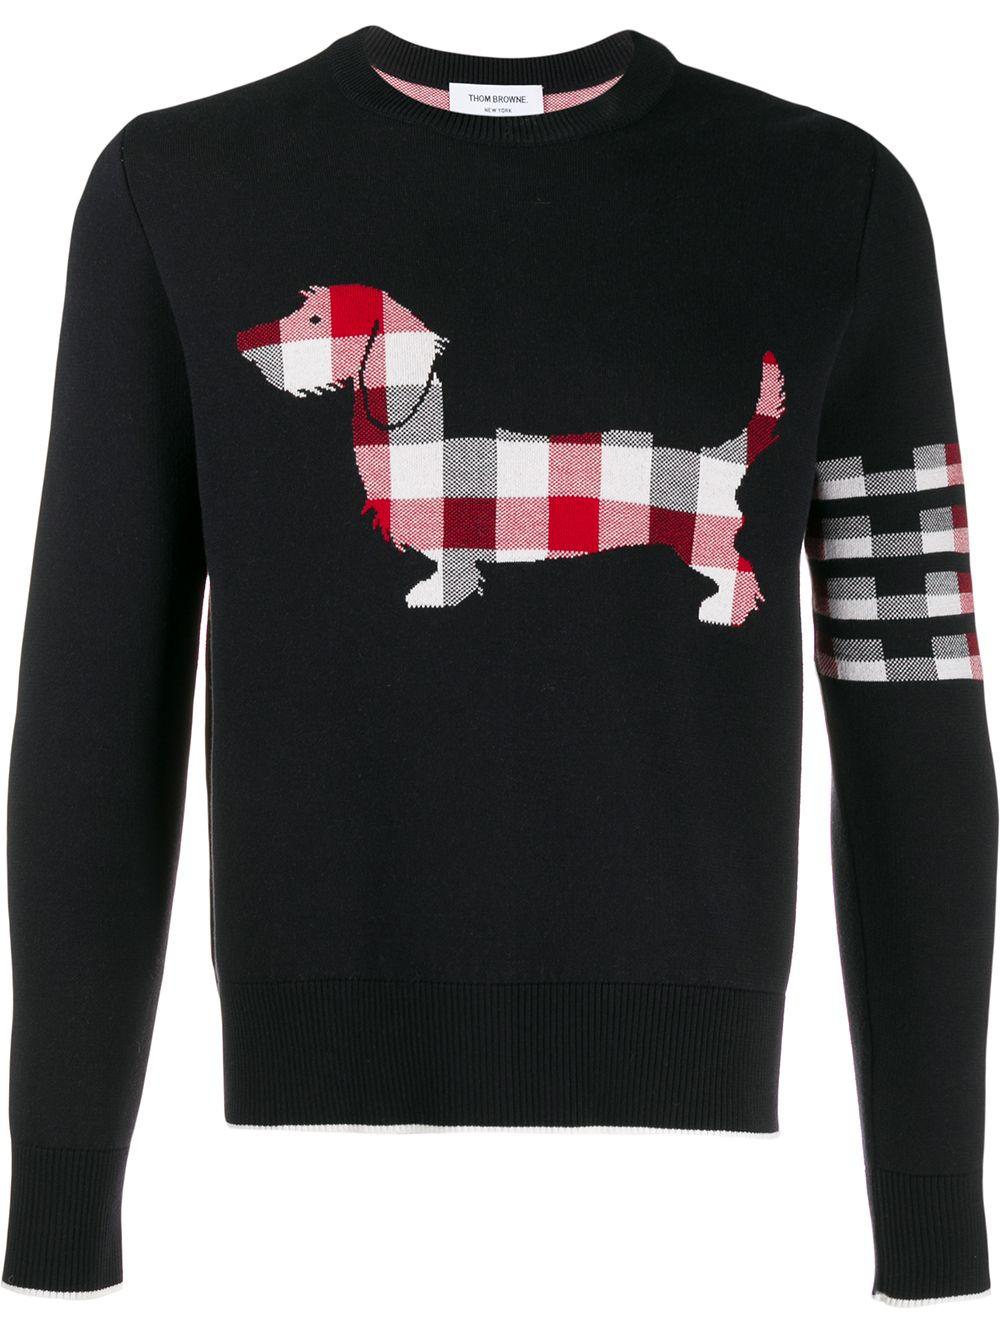 Thom Browne Hector Icon Jacquard Jumper in Blue (Black) for Men - Lyst